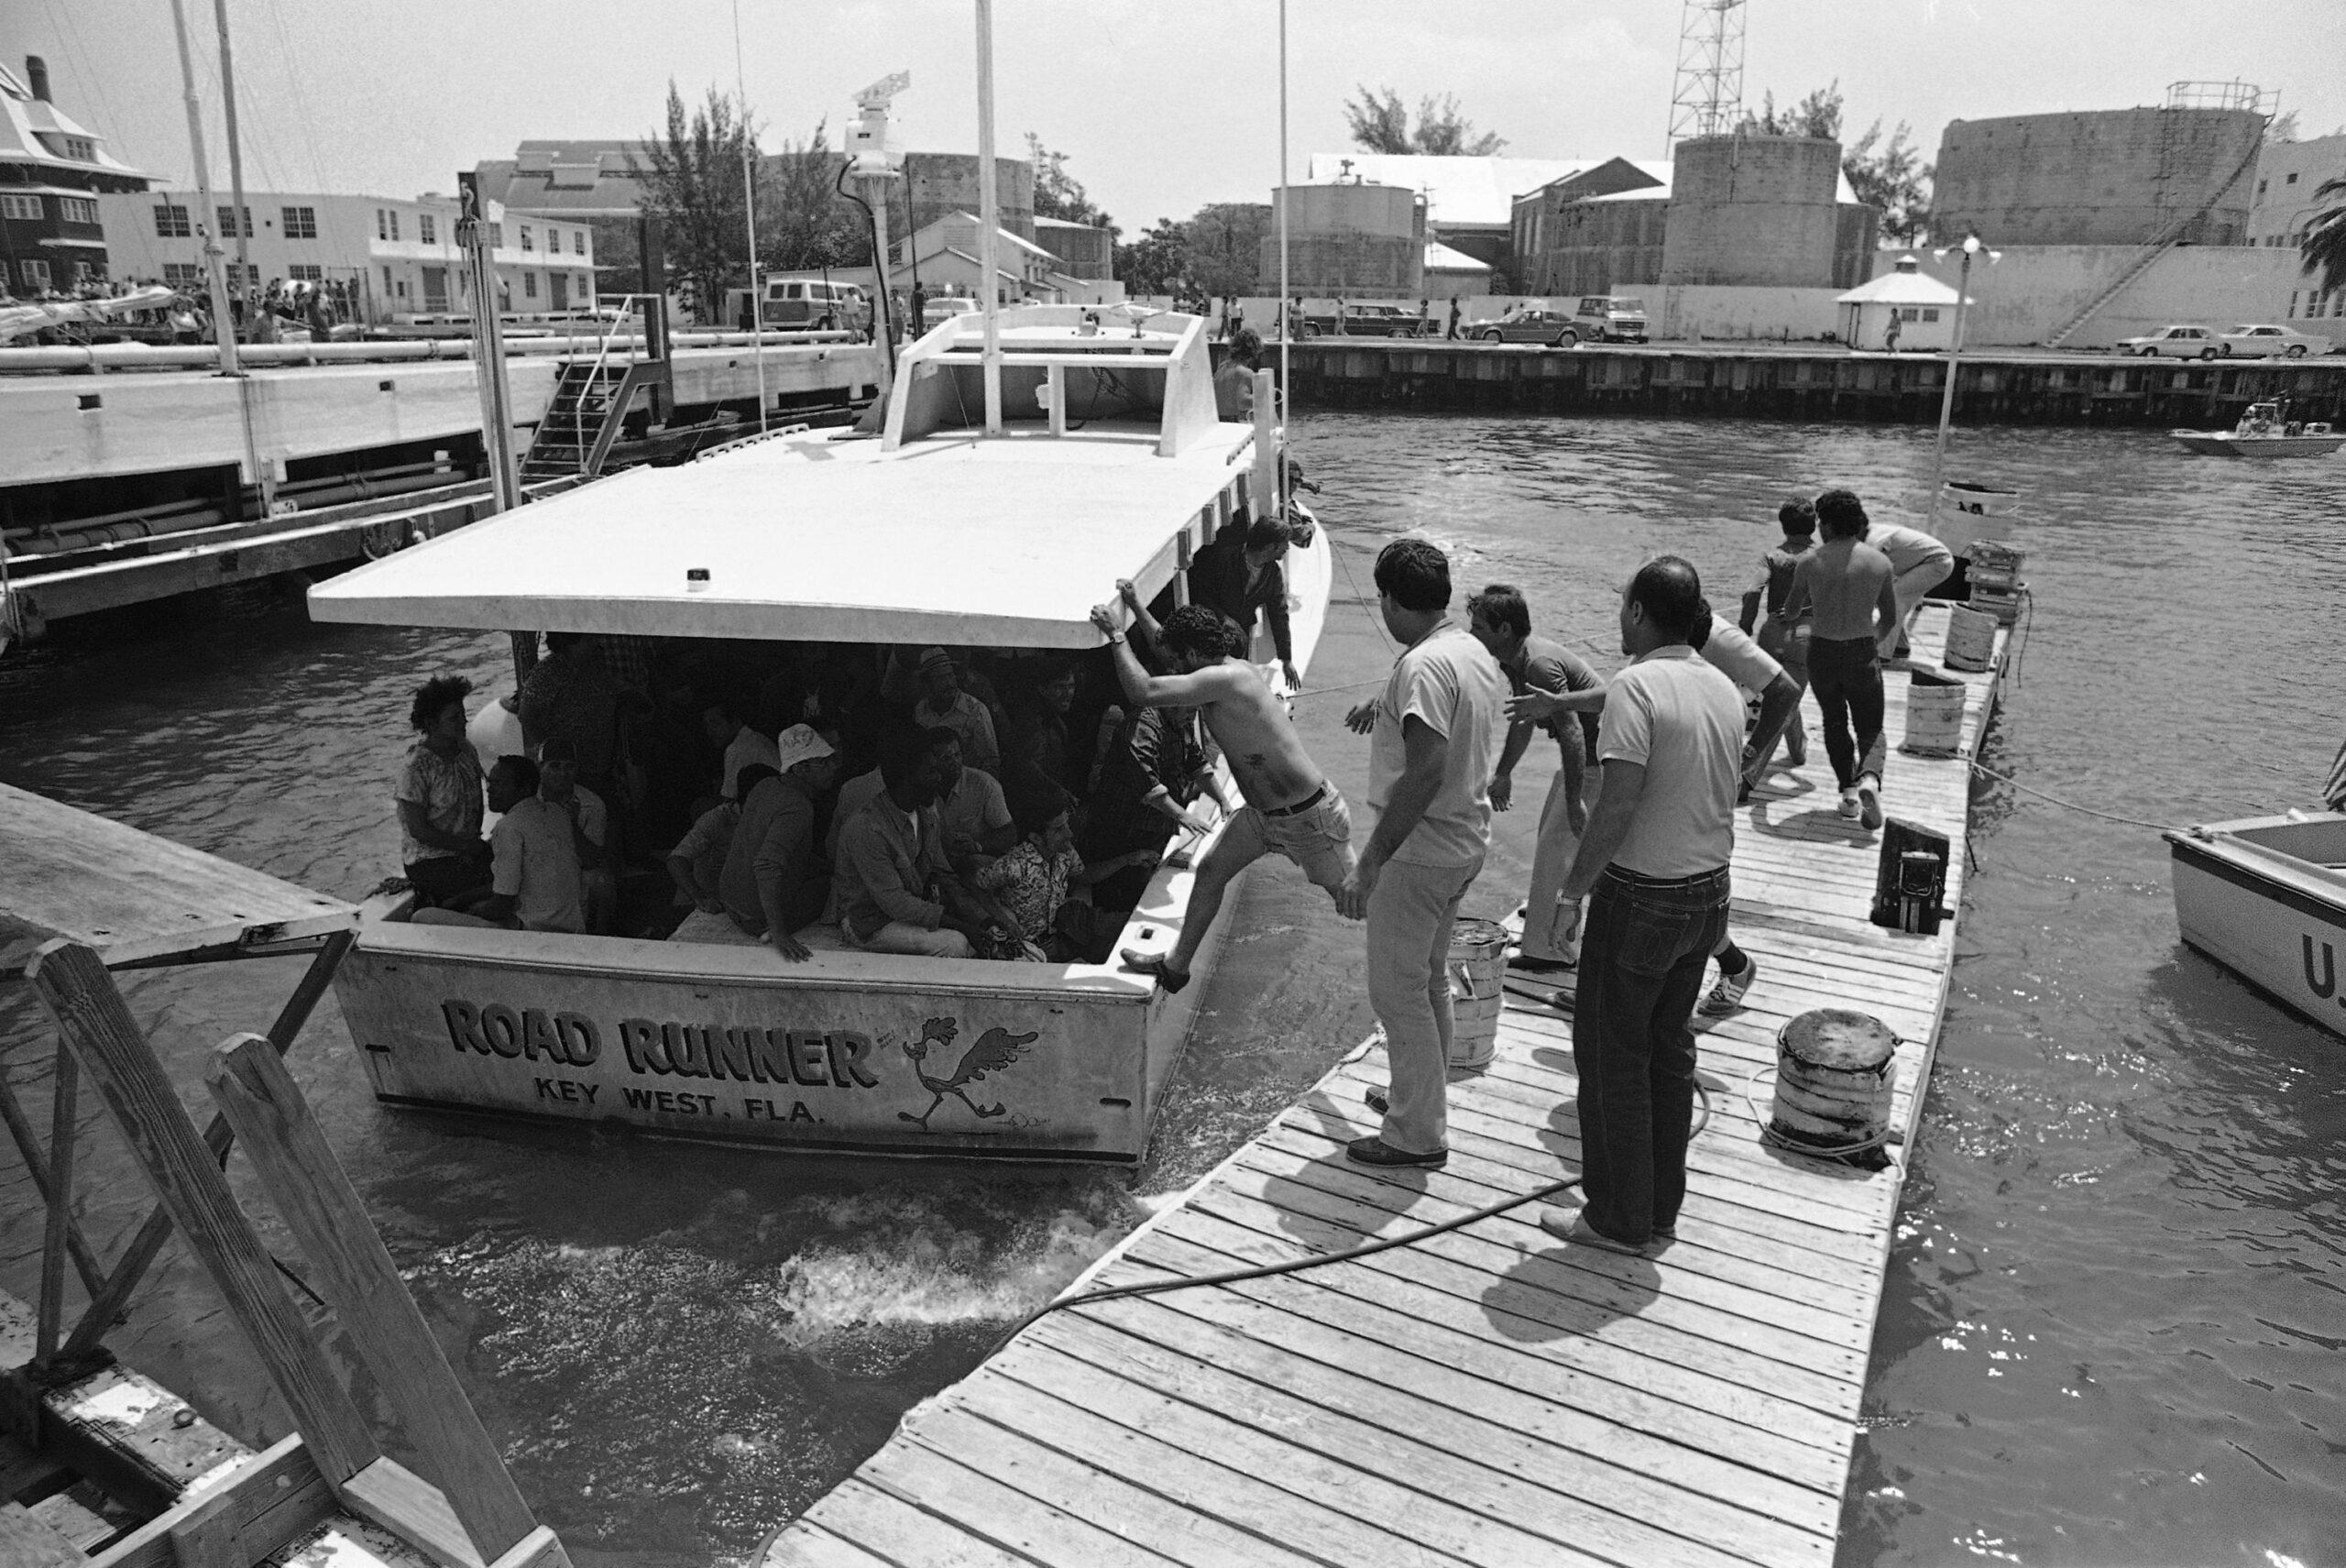 Volunteers from the Cuban exile community help pull into a dock